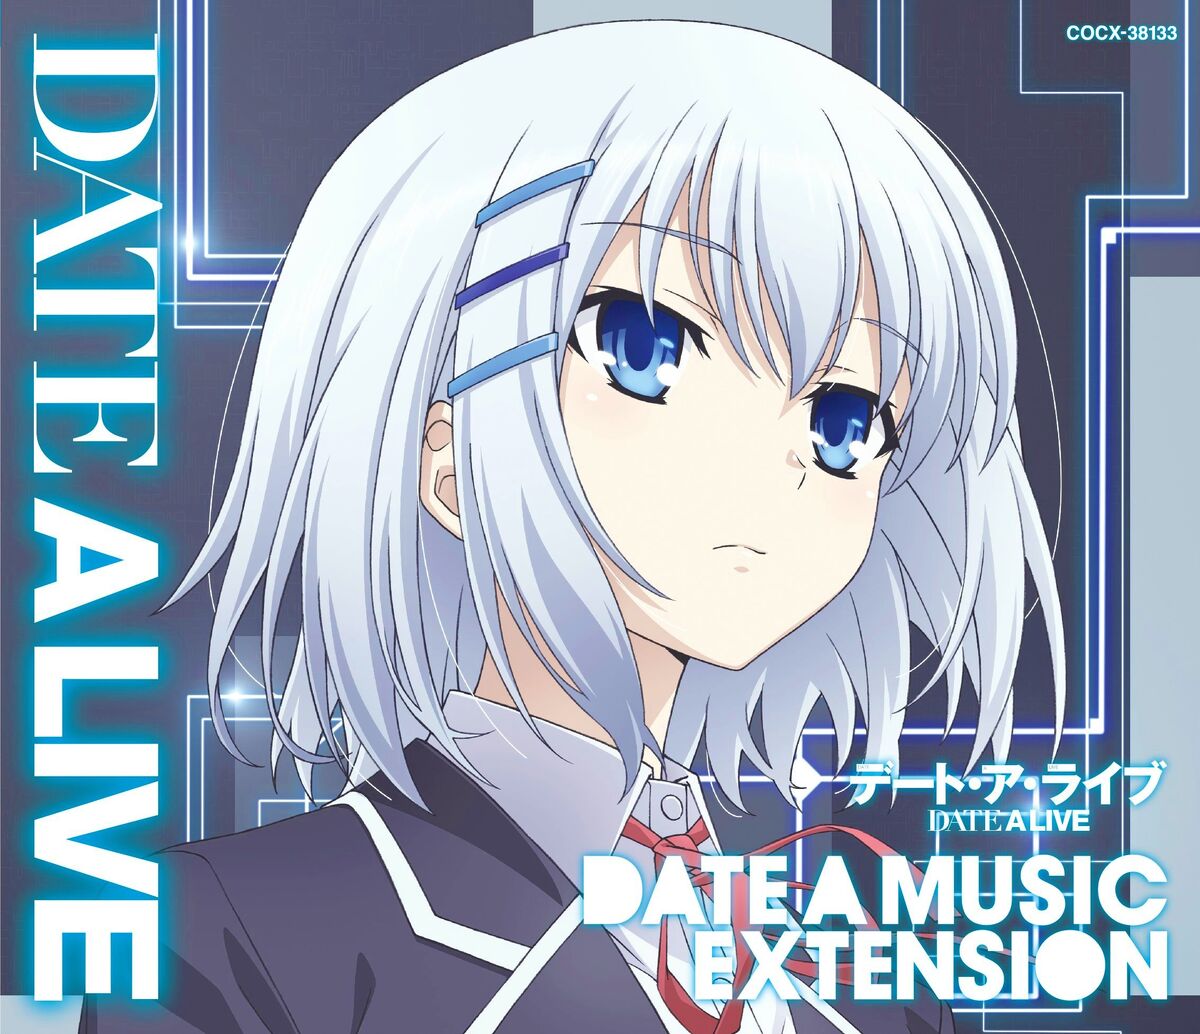 Date A Live (song), Date A Live Wiki